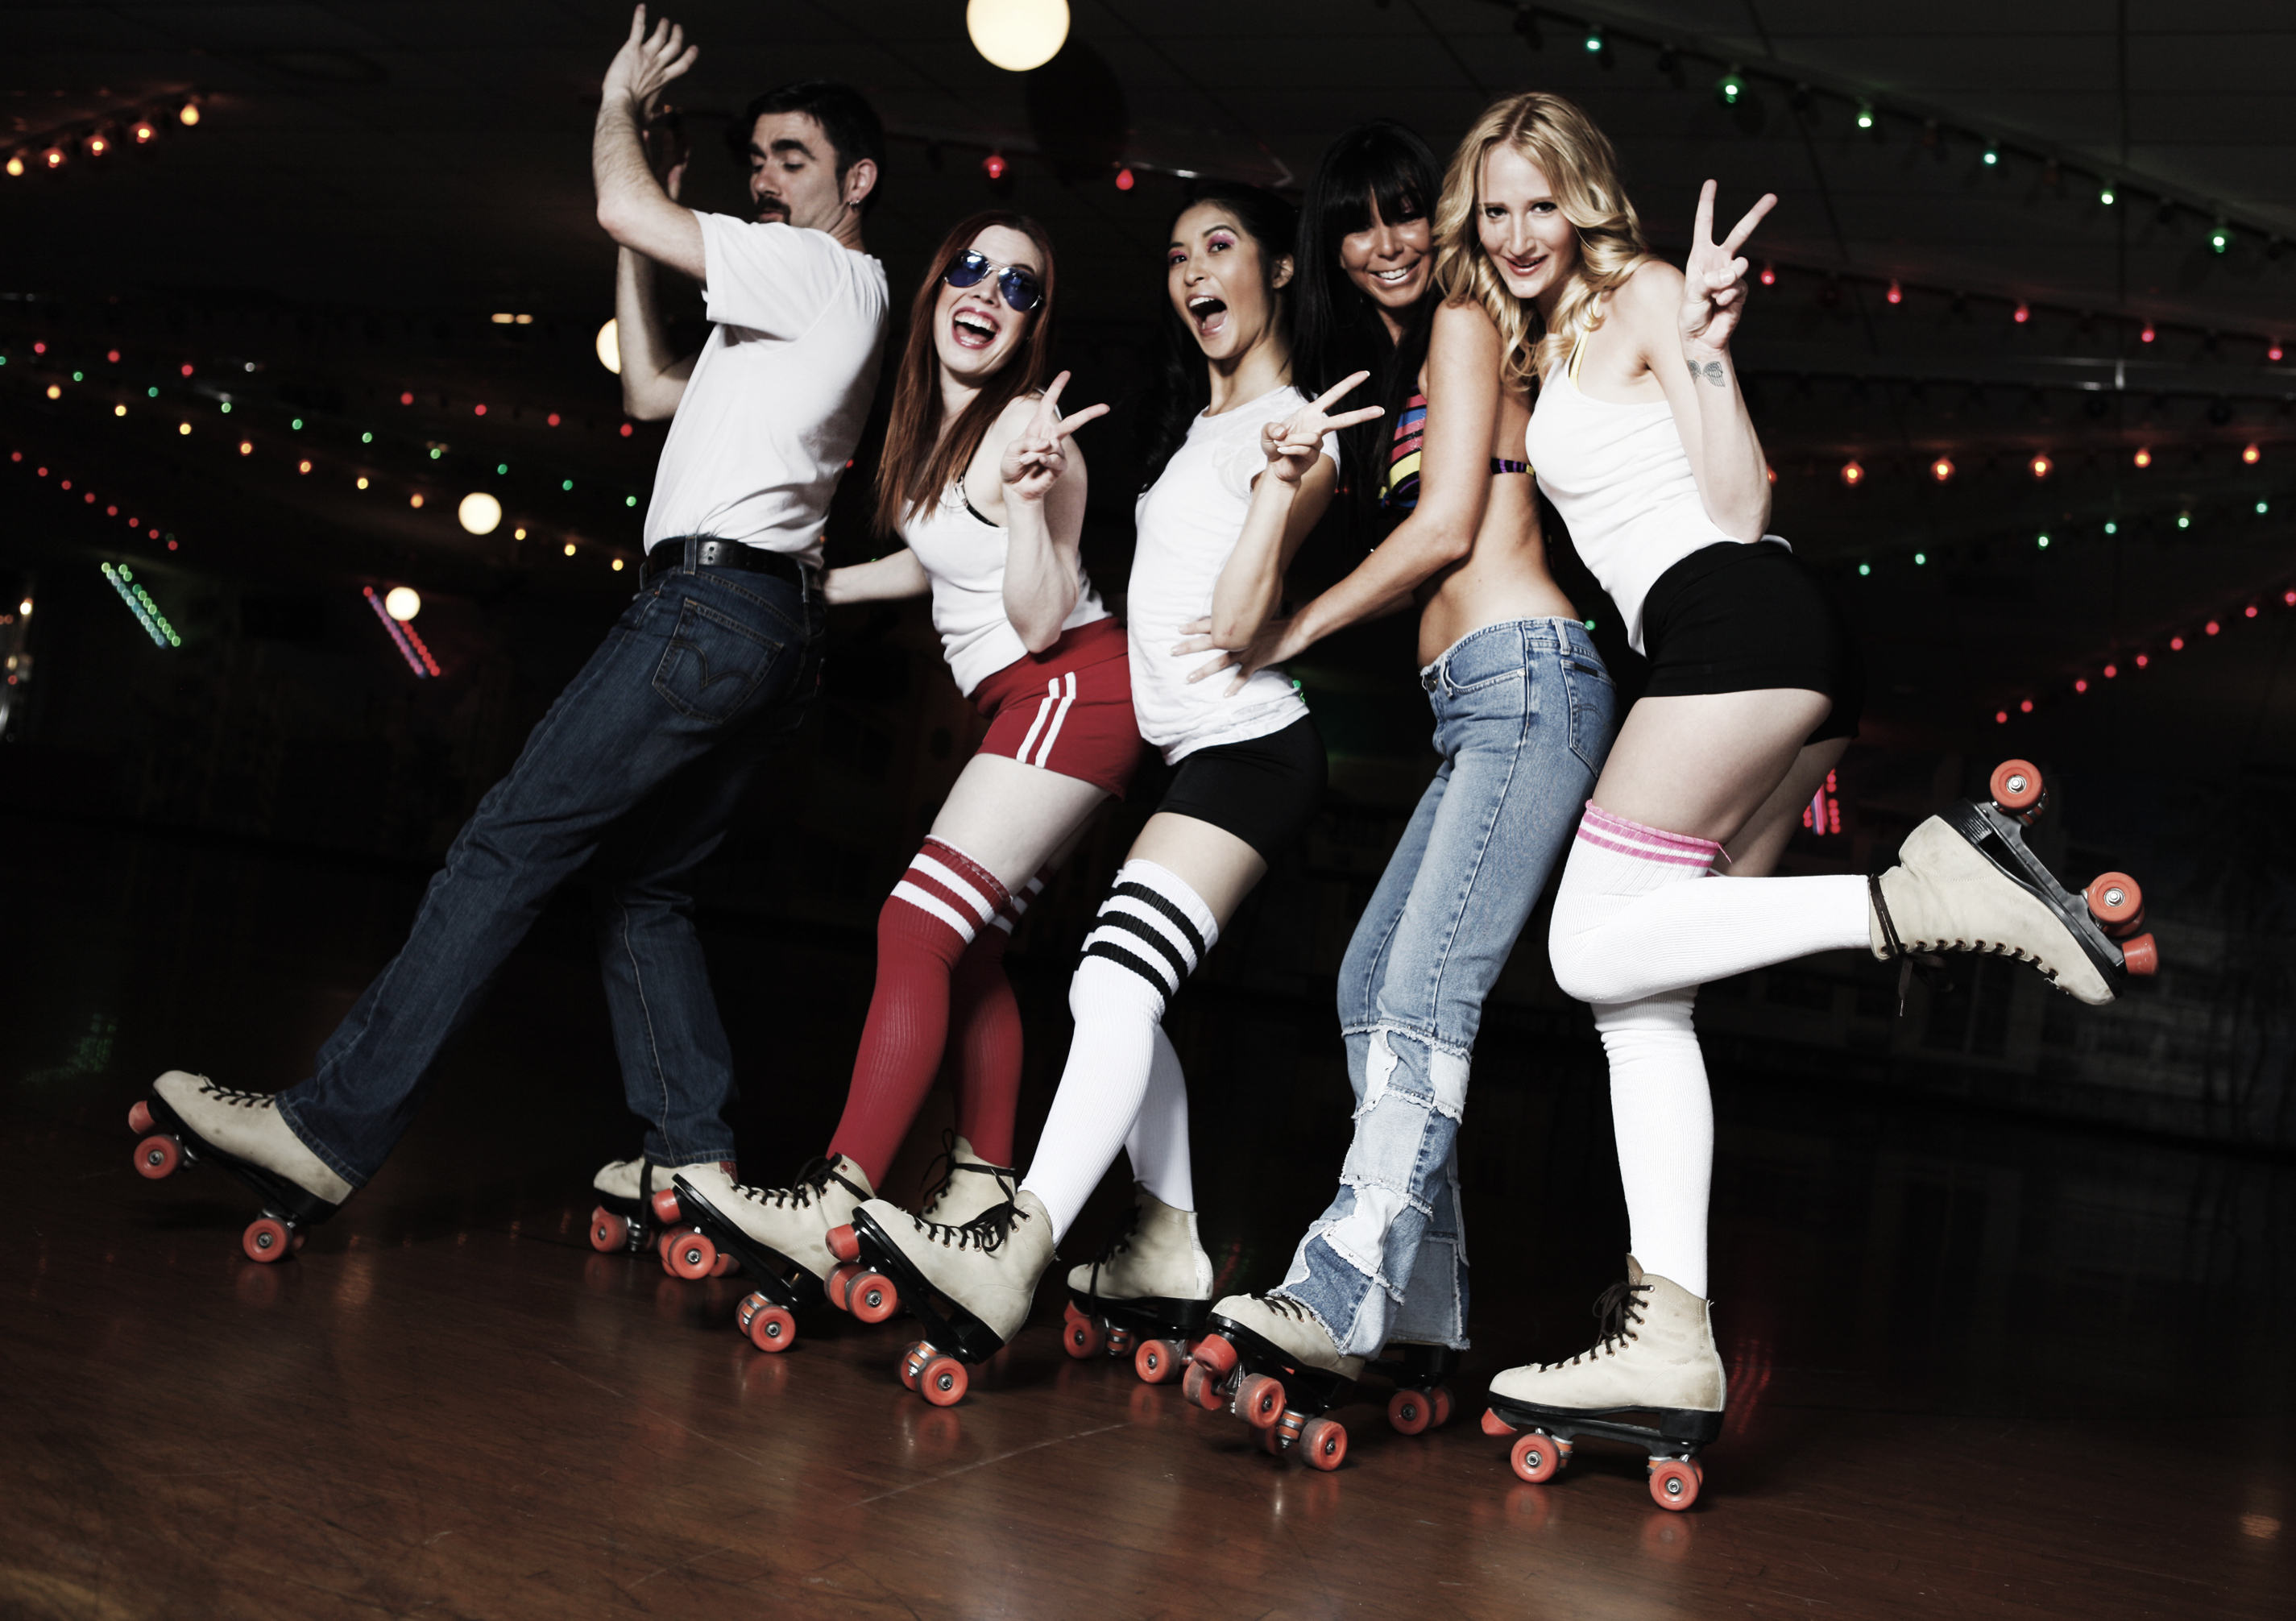 Have Some Retro Fun at the Funkiest Roller Rinks Around Uptown